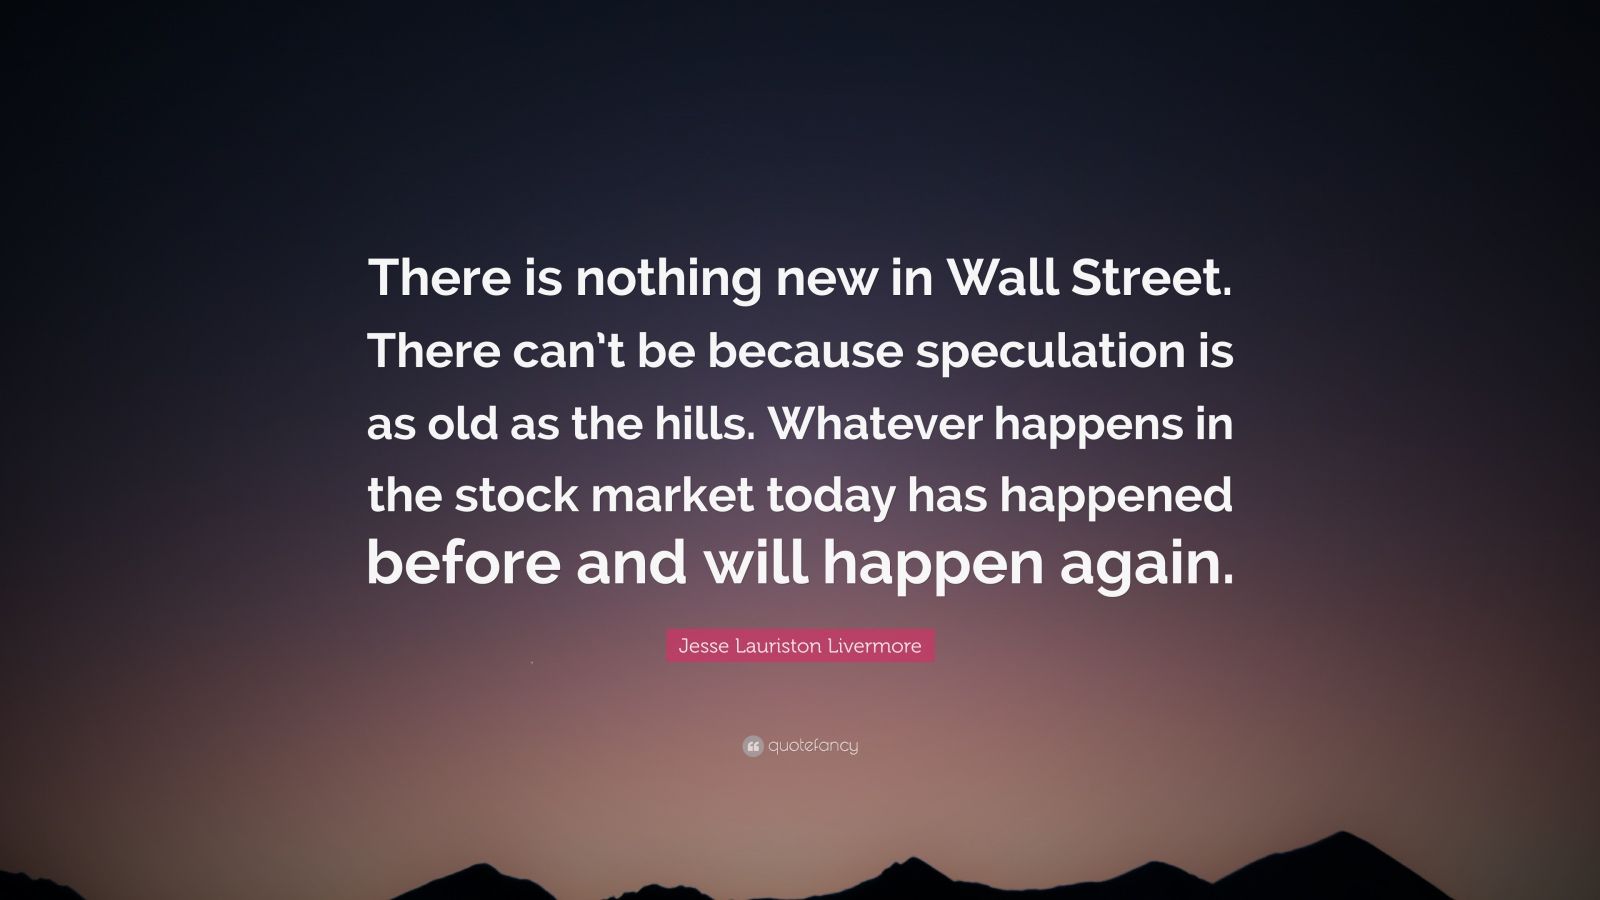 Top 60 Jesse Lauriston Livermore Quotes | 2021 Edition | Free Images ... Nothing Happens Before Its Time Quotes